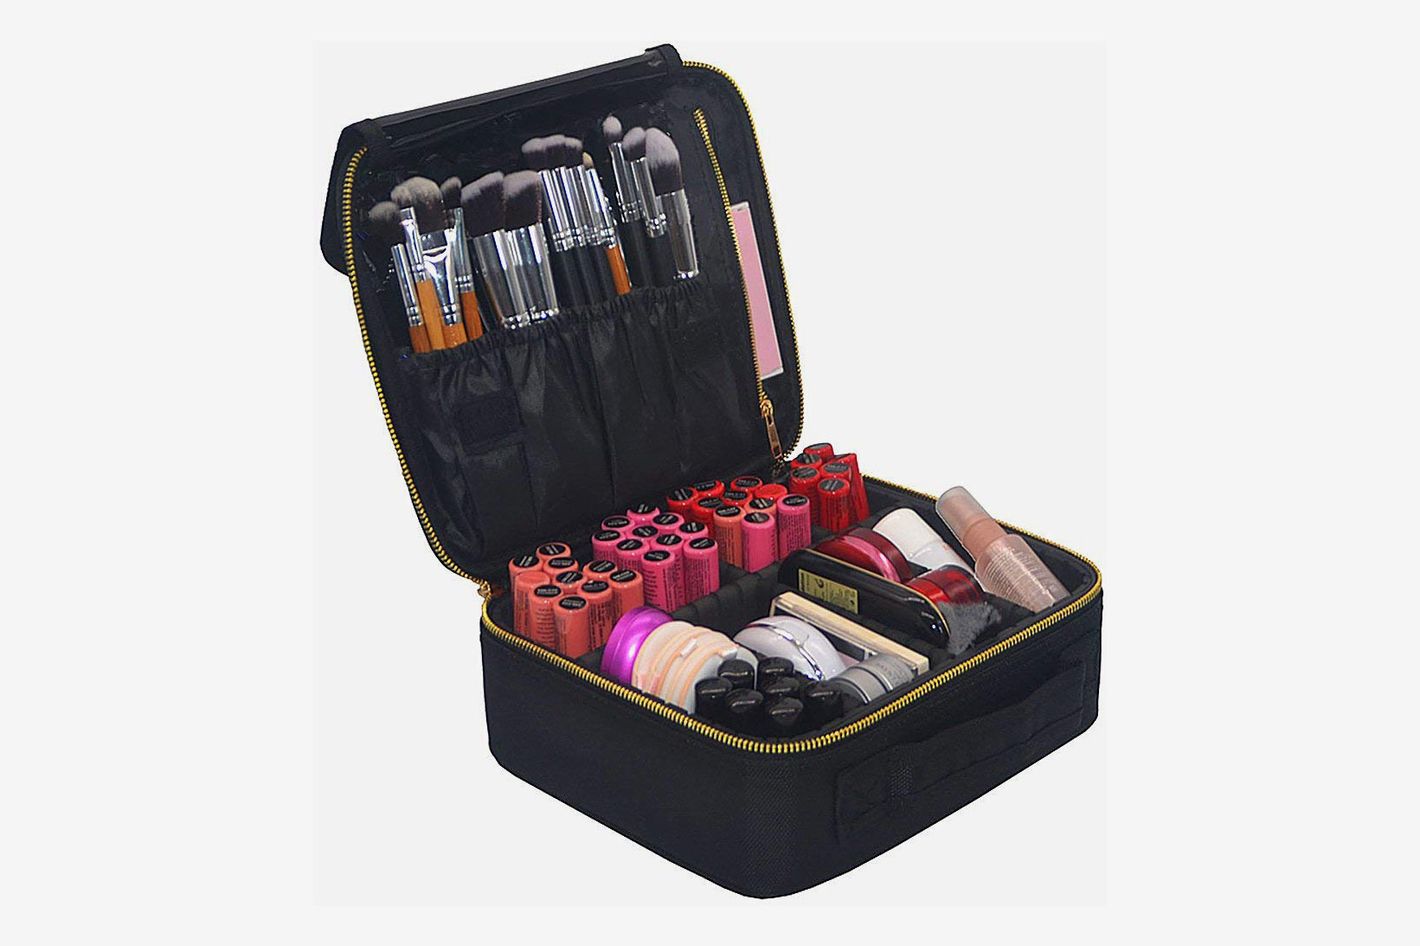 21 Best Makeup Bags Reviewed by Makeup Artists 2018